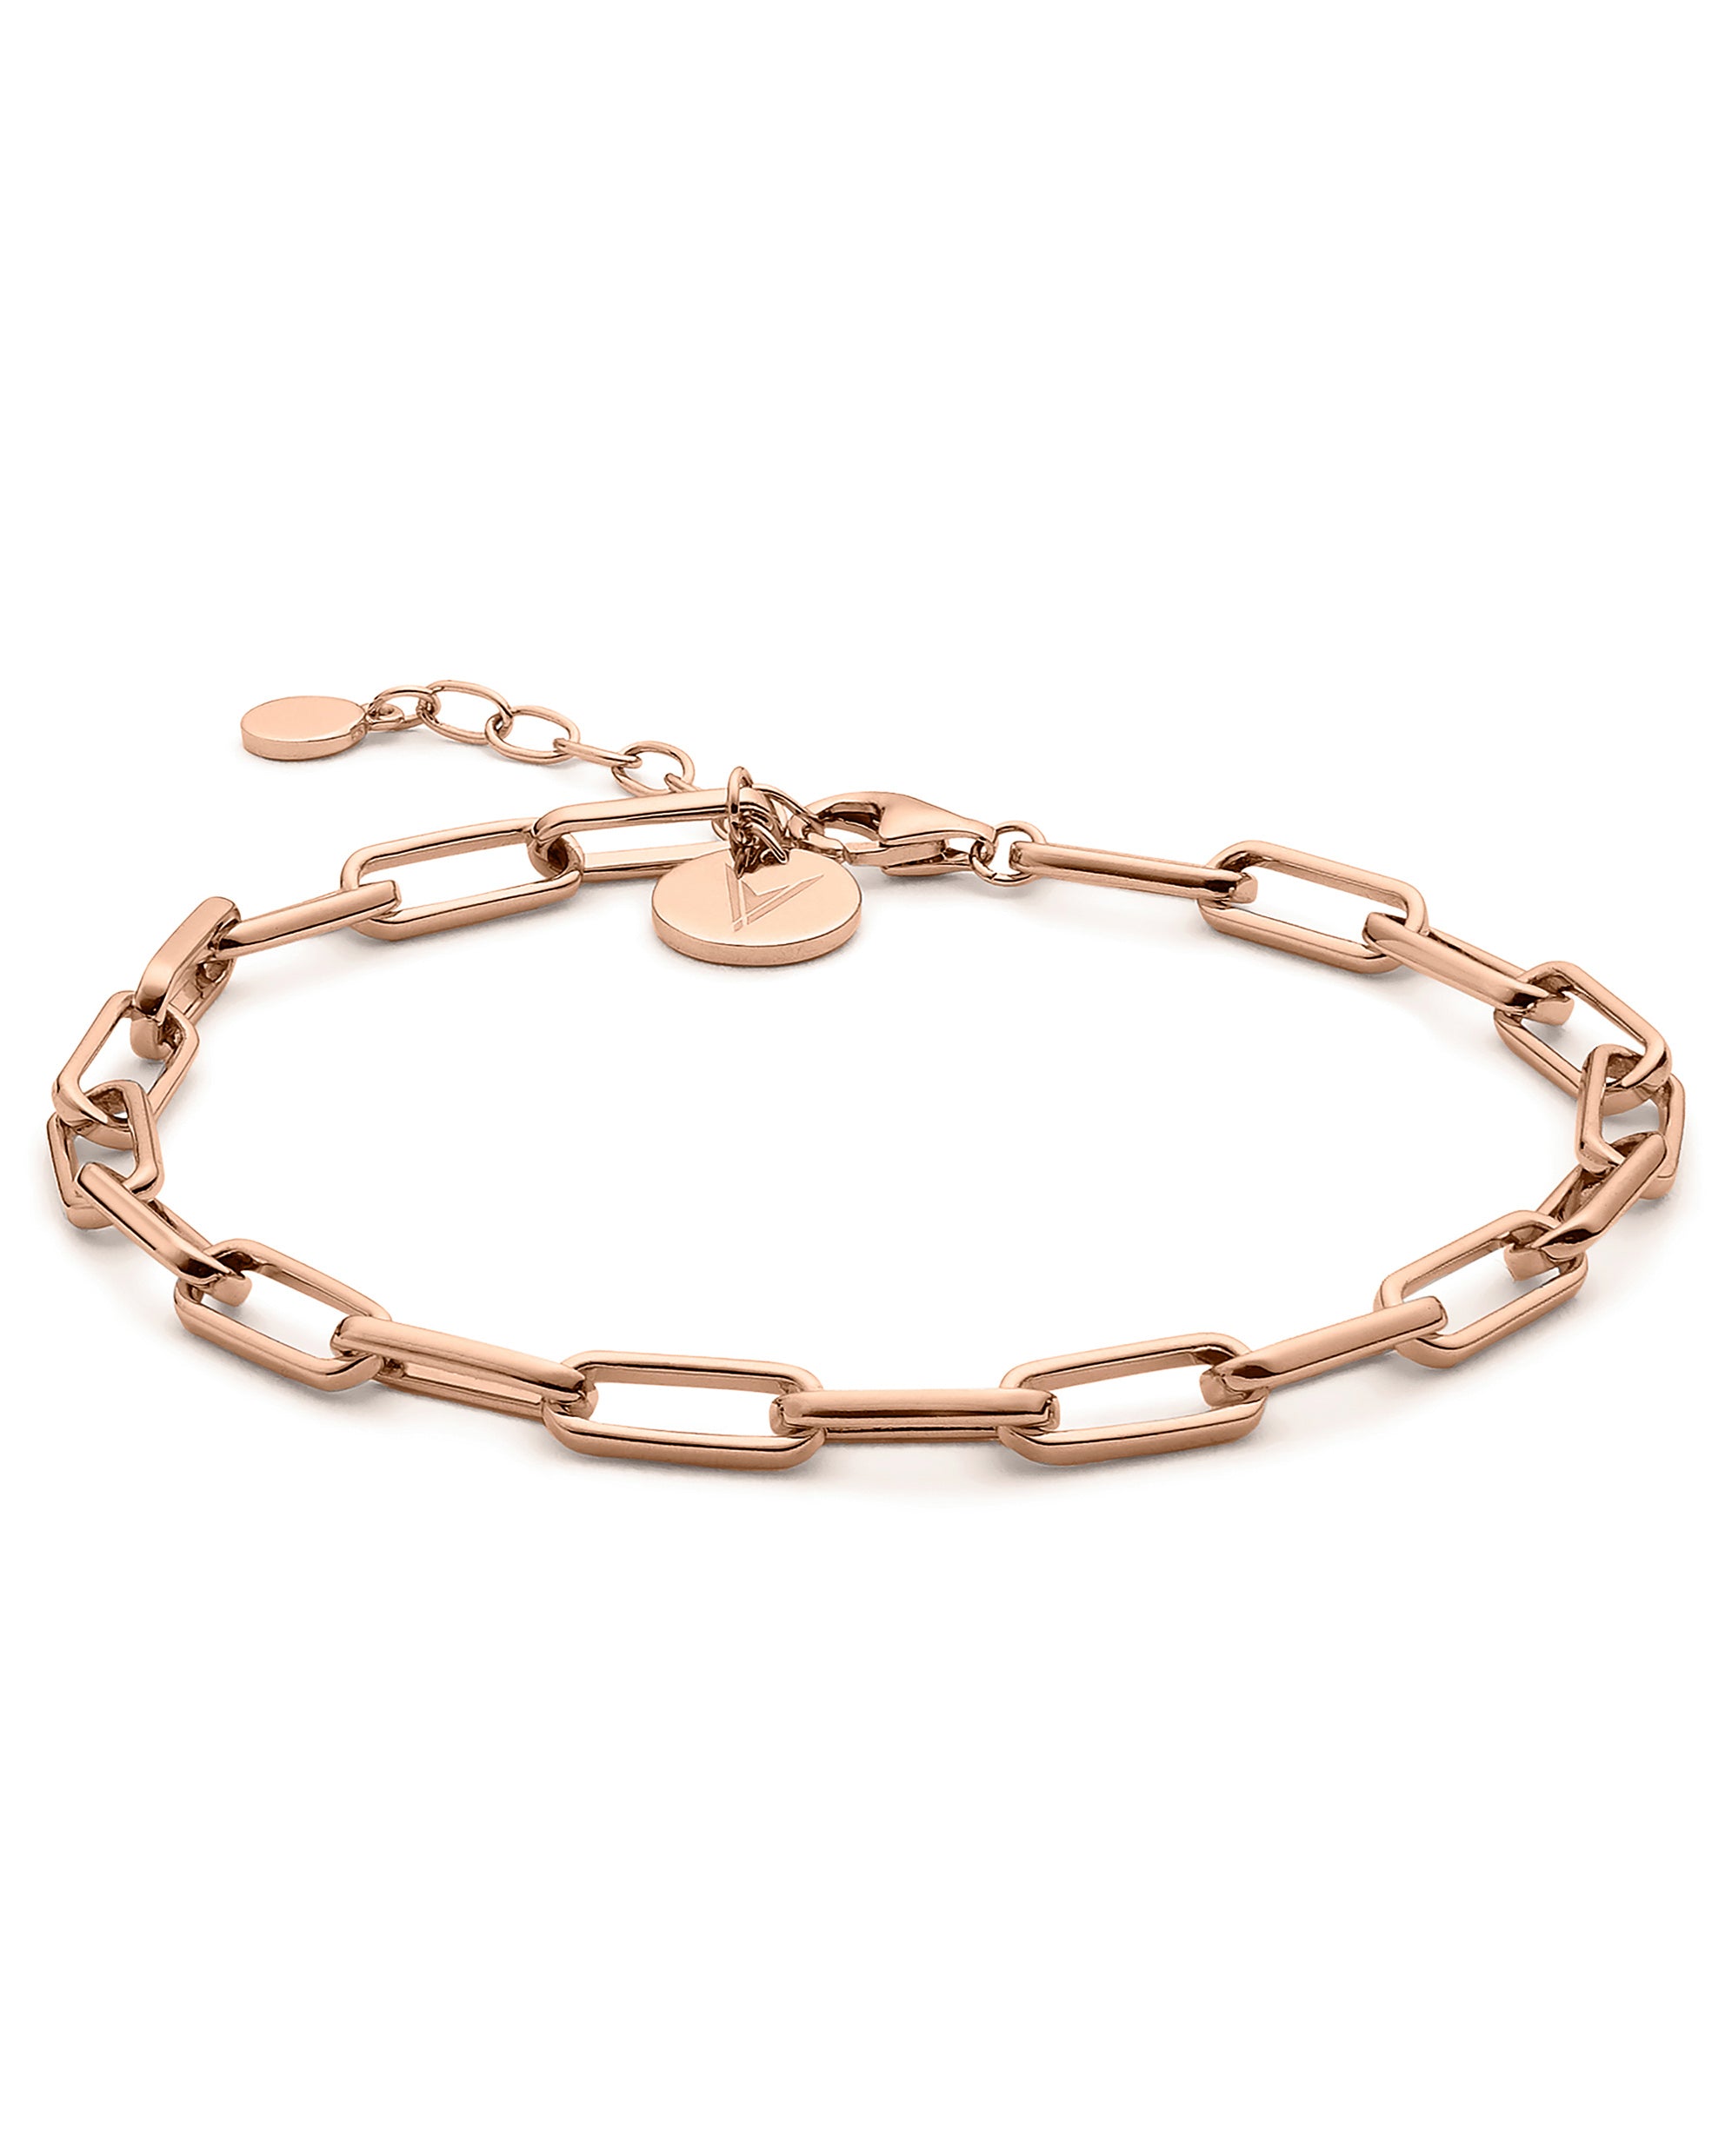 The Chain Link Bracelet - Rose Gold, Vincero Watches